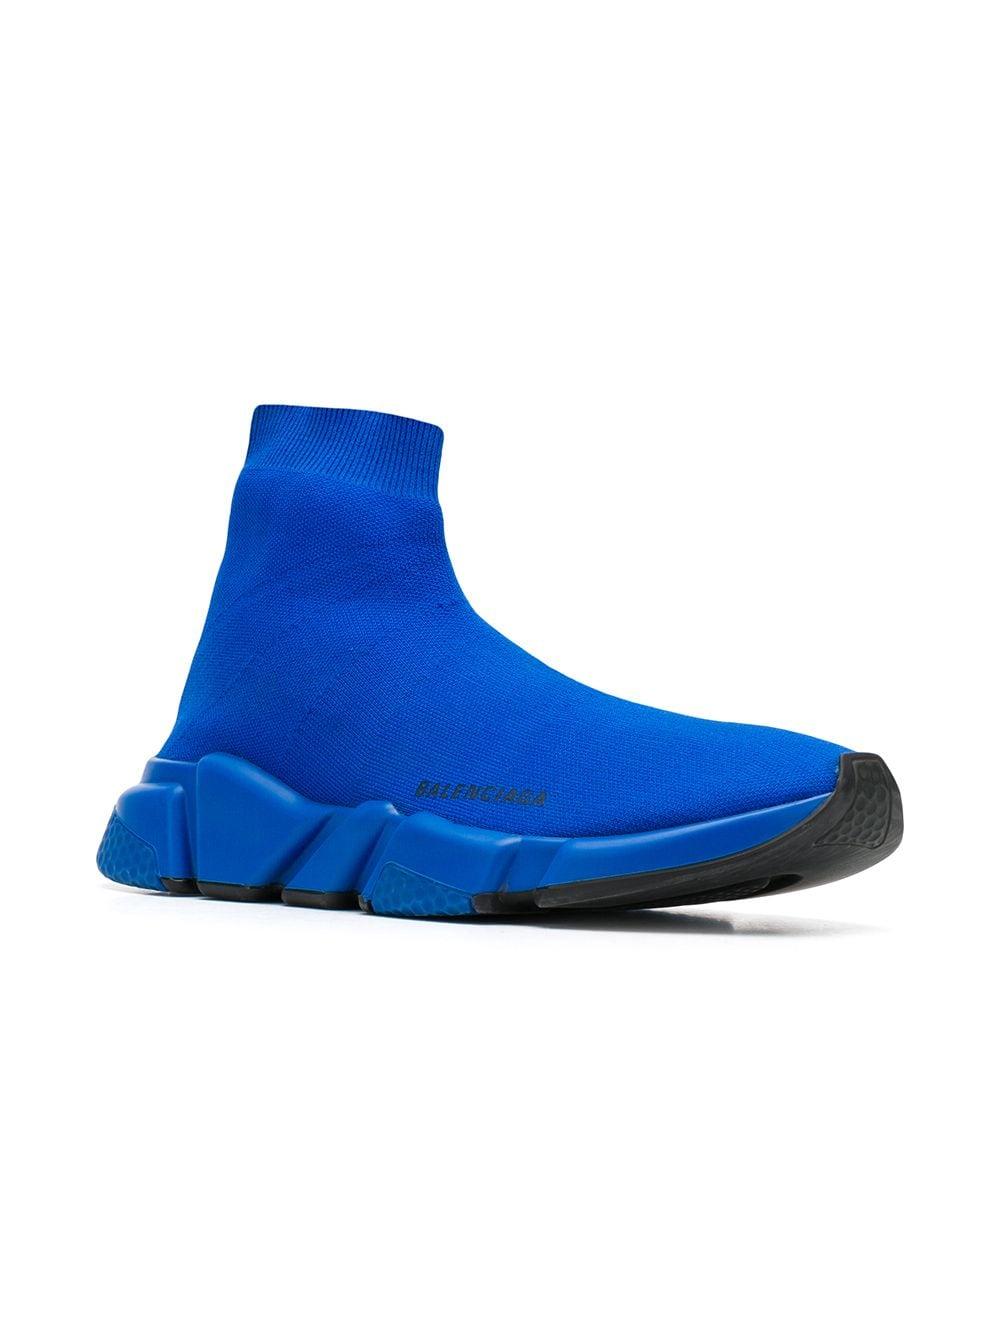 Balenciaga Rubber Men's Speed Trainer Sock Sneakers - Electric Blue for ...